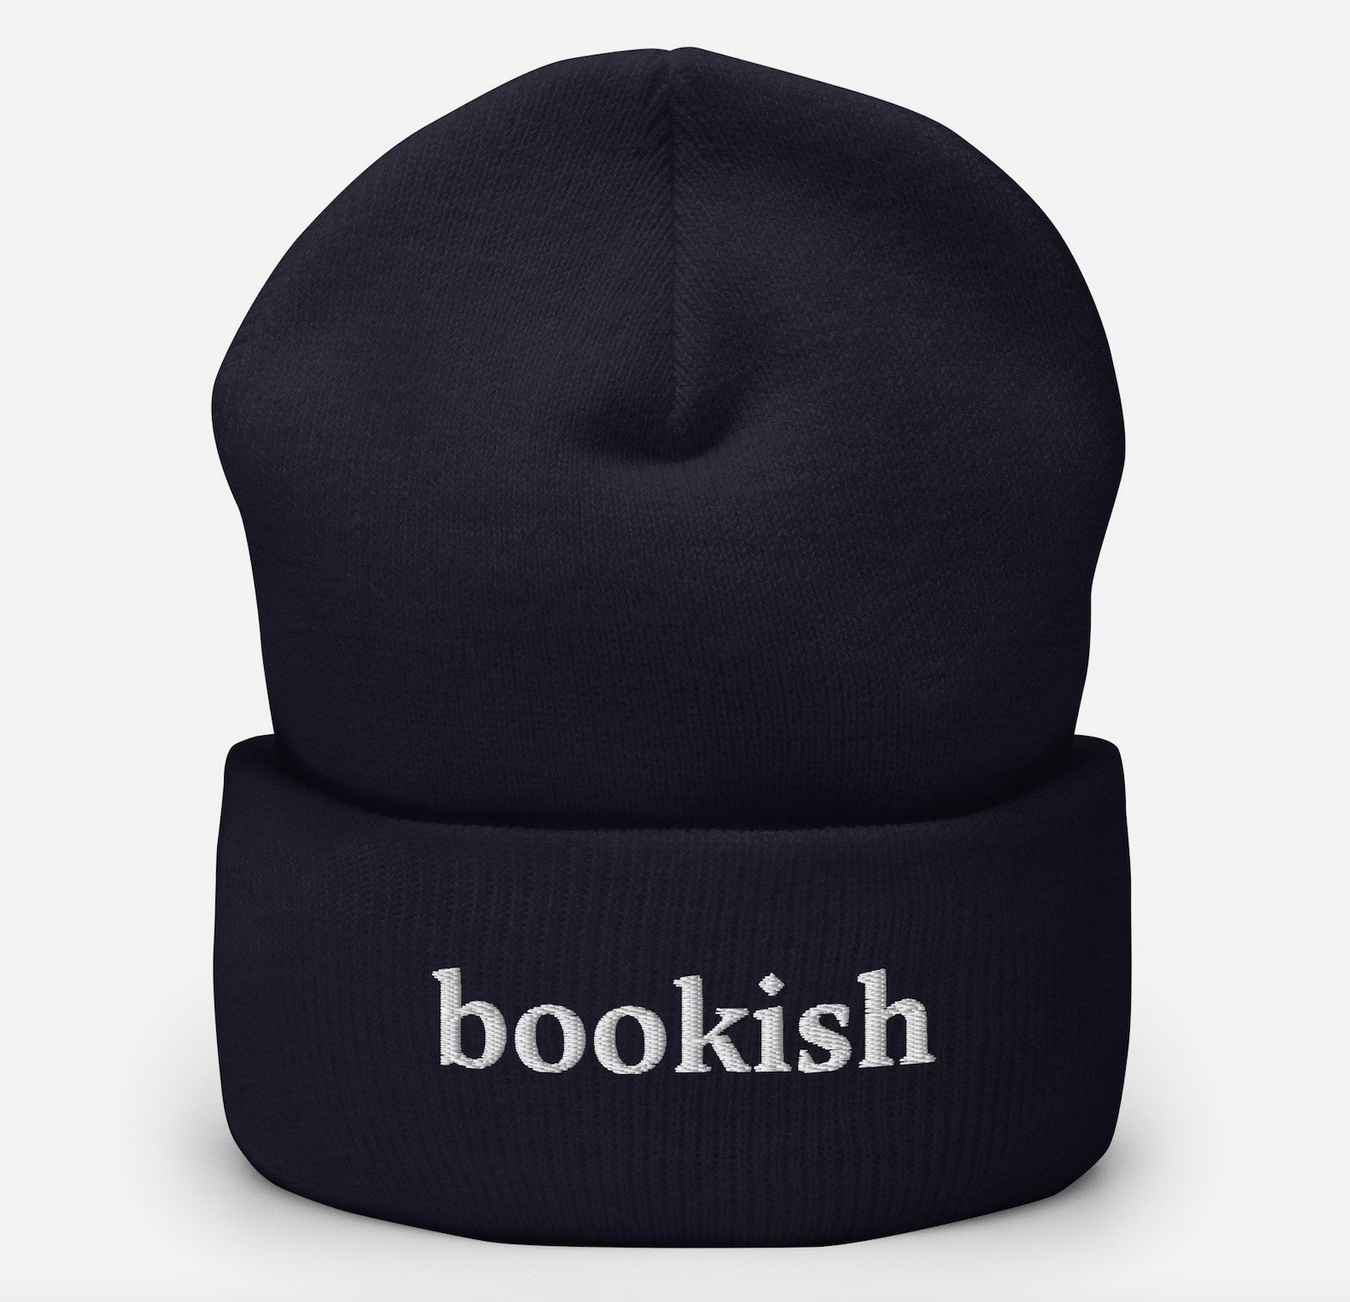 Navy beanie with white embroidered text that says "bookish"